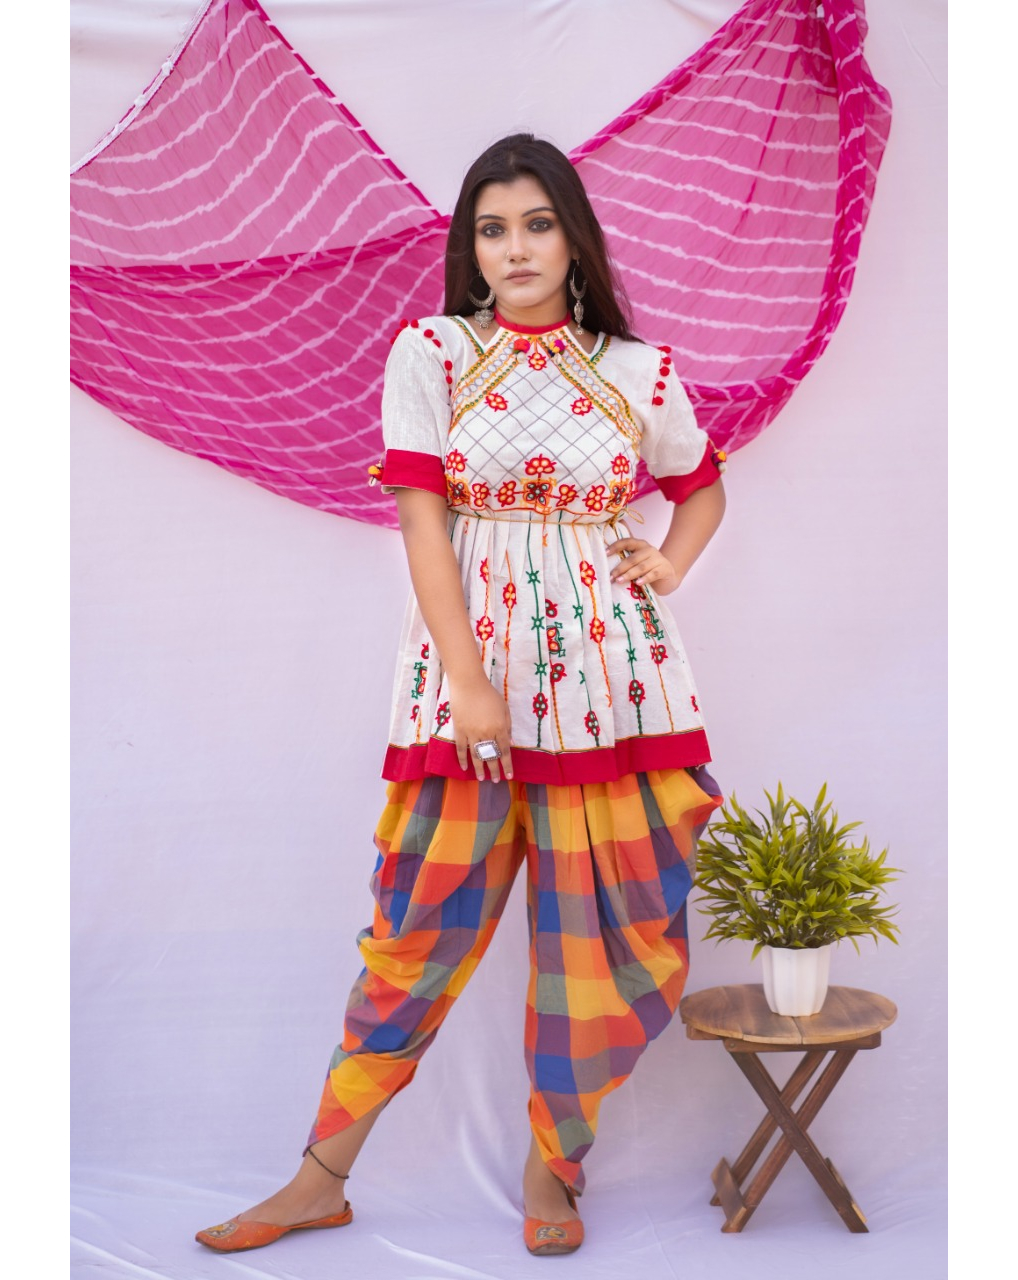 Mirraw - @_bongprincess_ gives us a total navrati vibe in the white embroidered kedia & chequered multi colored tulip pants.⁣
Check out the amazing kedia from our navratri collection on @mirraw.⁣
Shop...